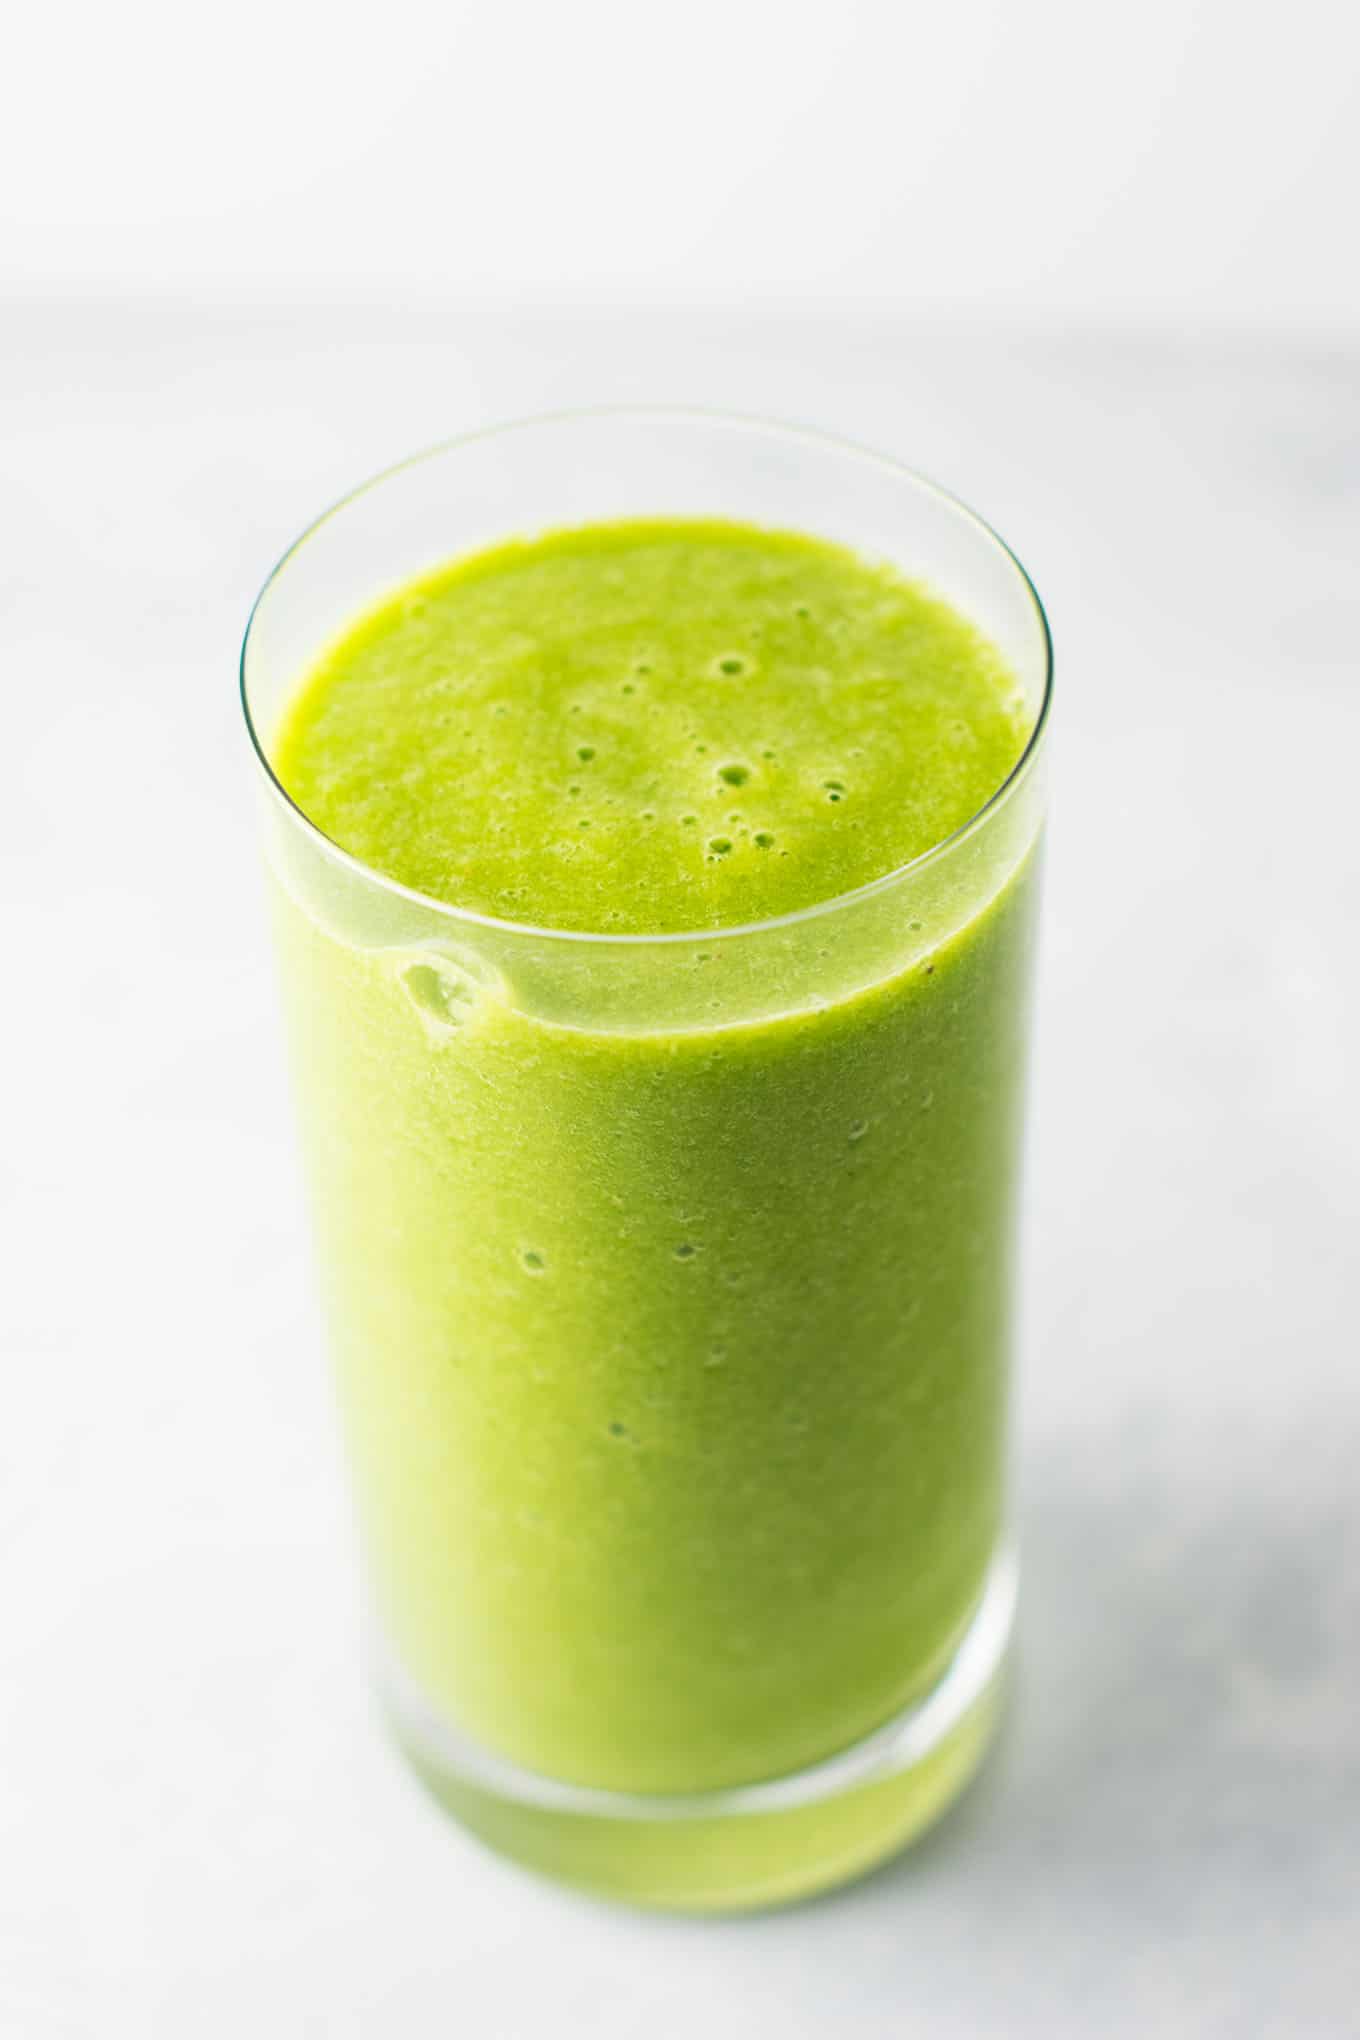 The BEST EVER green smoothie recipe made with kale, ginger, oranges, lemon, frozen banana, frozen peaches, and water. A ridiculously good for you delicious green smoothie that the whole family will love! #greensmoothierecipe #vegan #kale #drinks